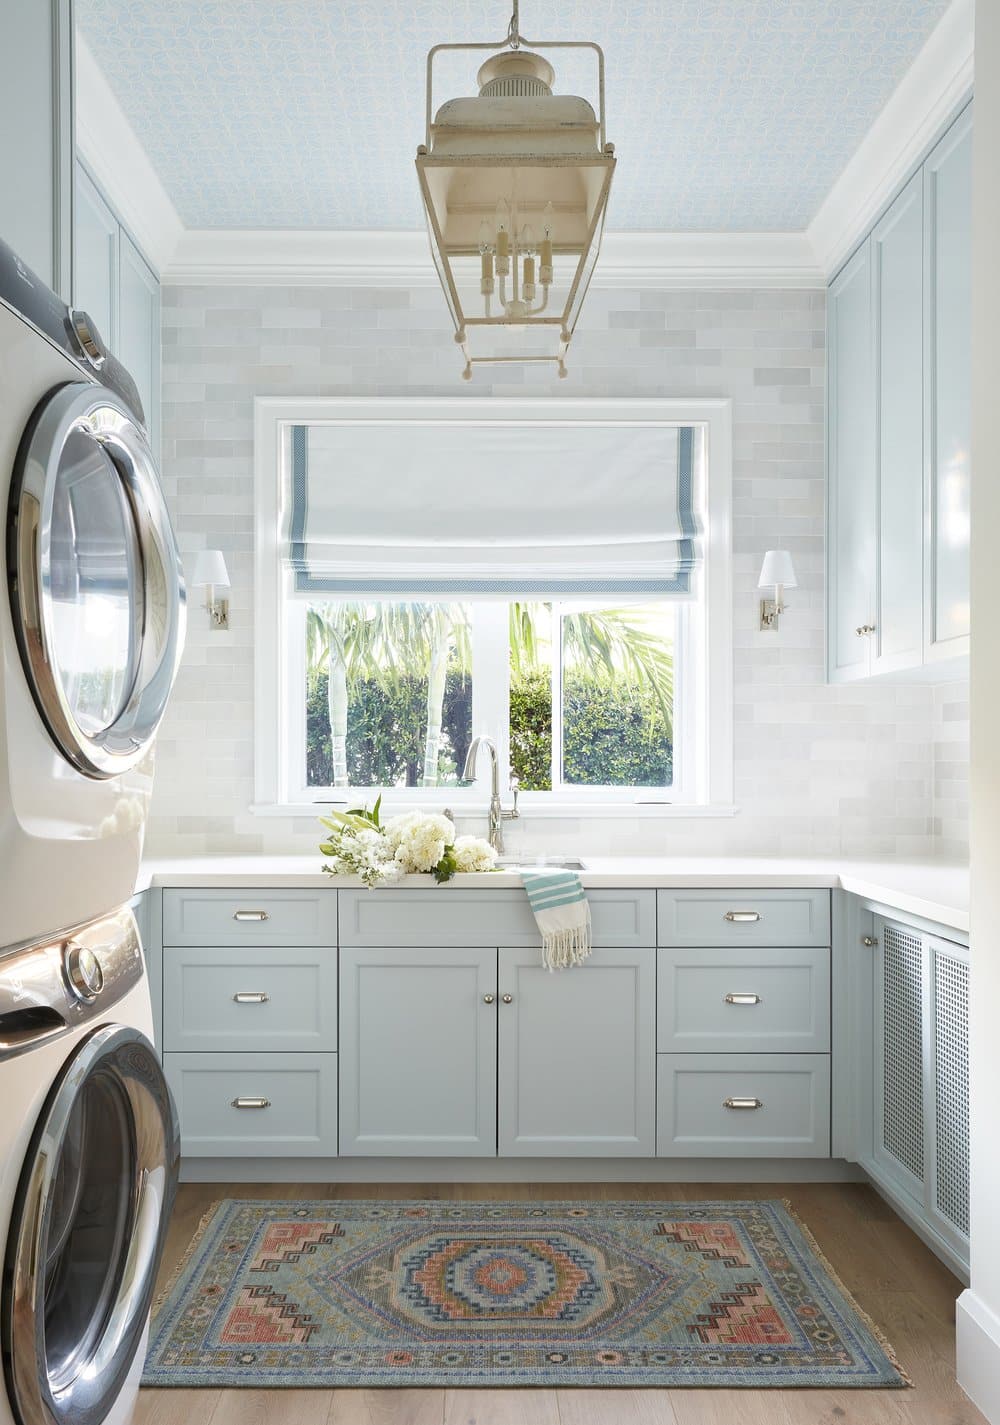 Functional Spaces Beautifully Designed by Kara Miller Interiors | Brantley Photography - Laundry room - tile floors